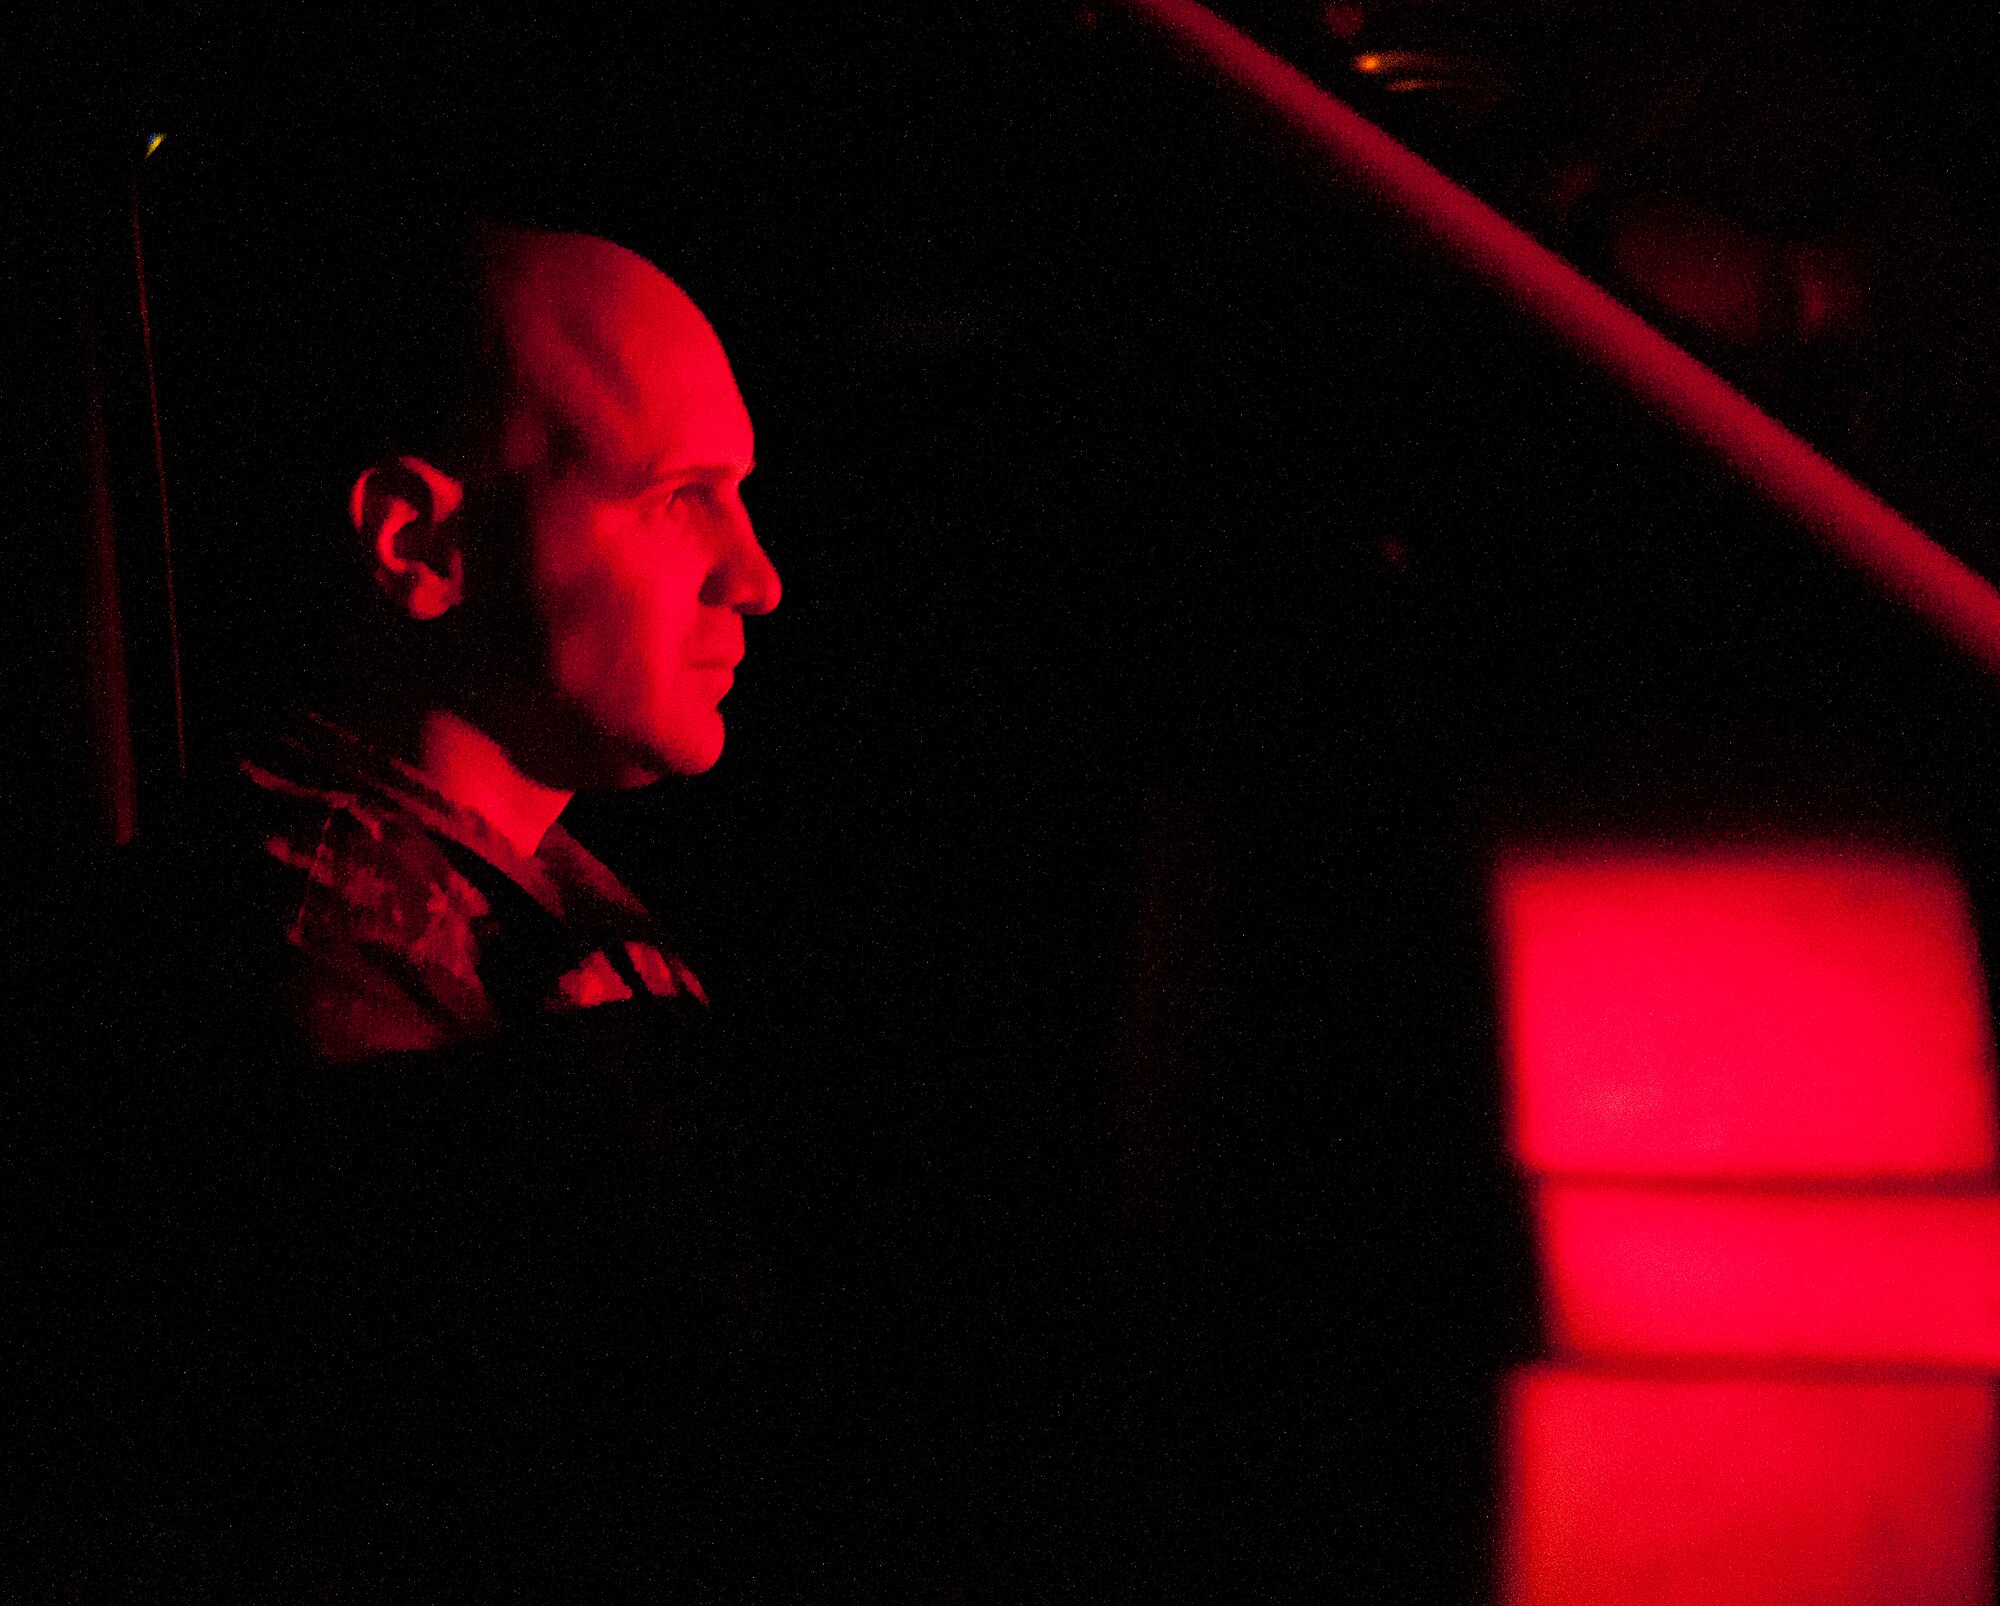 Tech. Sgt. Andreas Niemetschek, 90th Security Forces Squadron Delta Flight chief, stares down his Airmen after they surrounded him in police vehicles during a training exercise Aug. 6, 2015, on F.E. Warren Air Force Base, Wyo. Niemetschek struggled against the Delta Flight defenders as they wrestled him out of the vehicle and handcuffed him on the ground. (U.S. Air Force photo by Senior Airman Jason Wiese/Released)